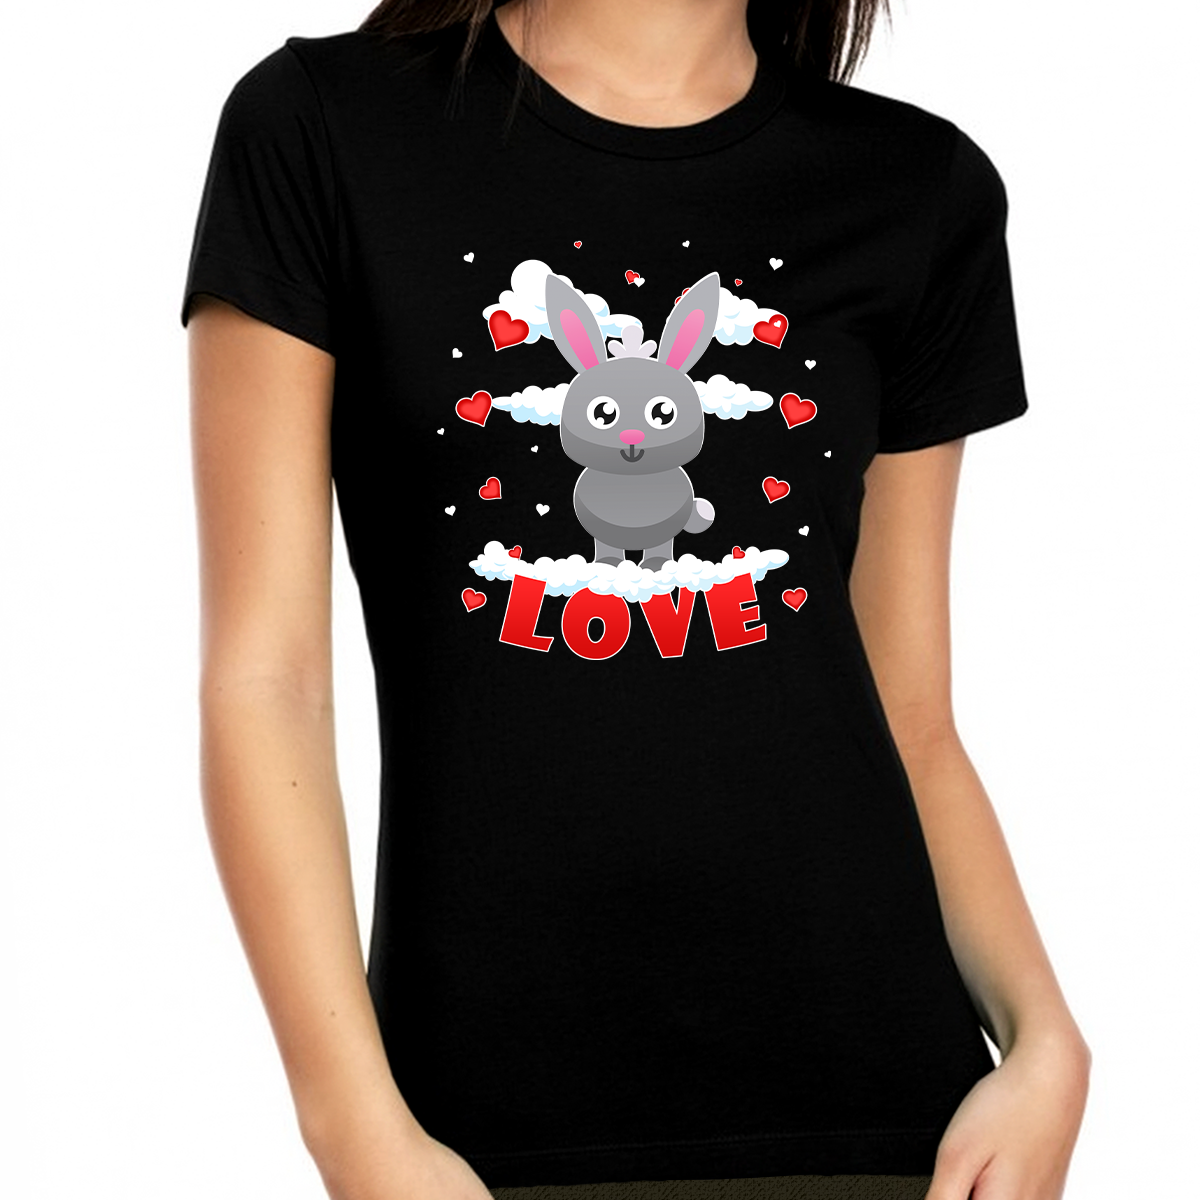 Valentines Day Shirt Women Heart Shirts for Women Cute Bunny Valentine Shirt Valentines Day Gifts for Her